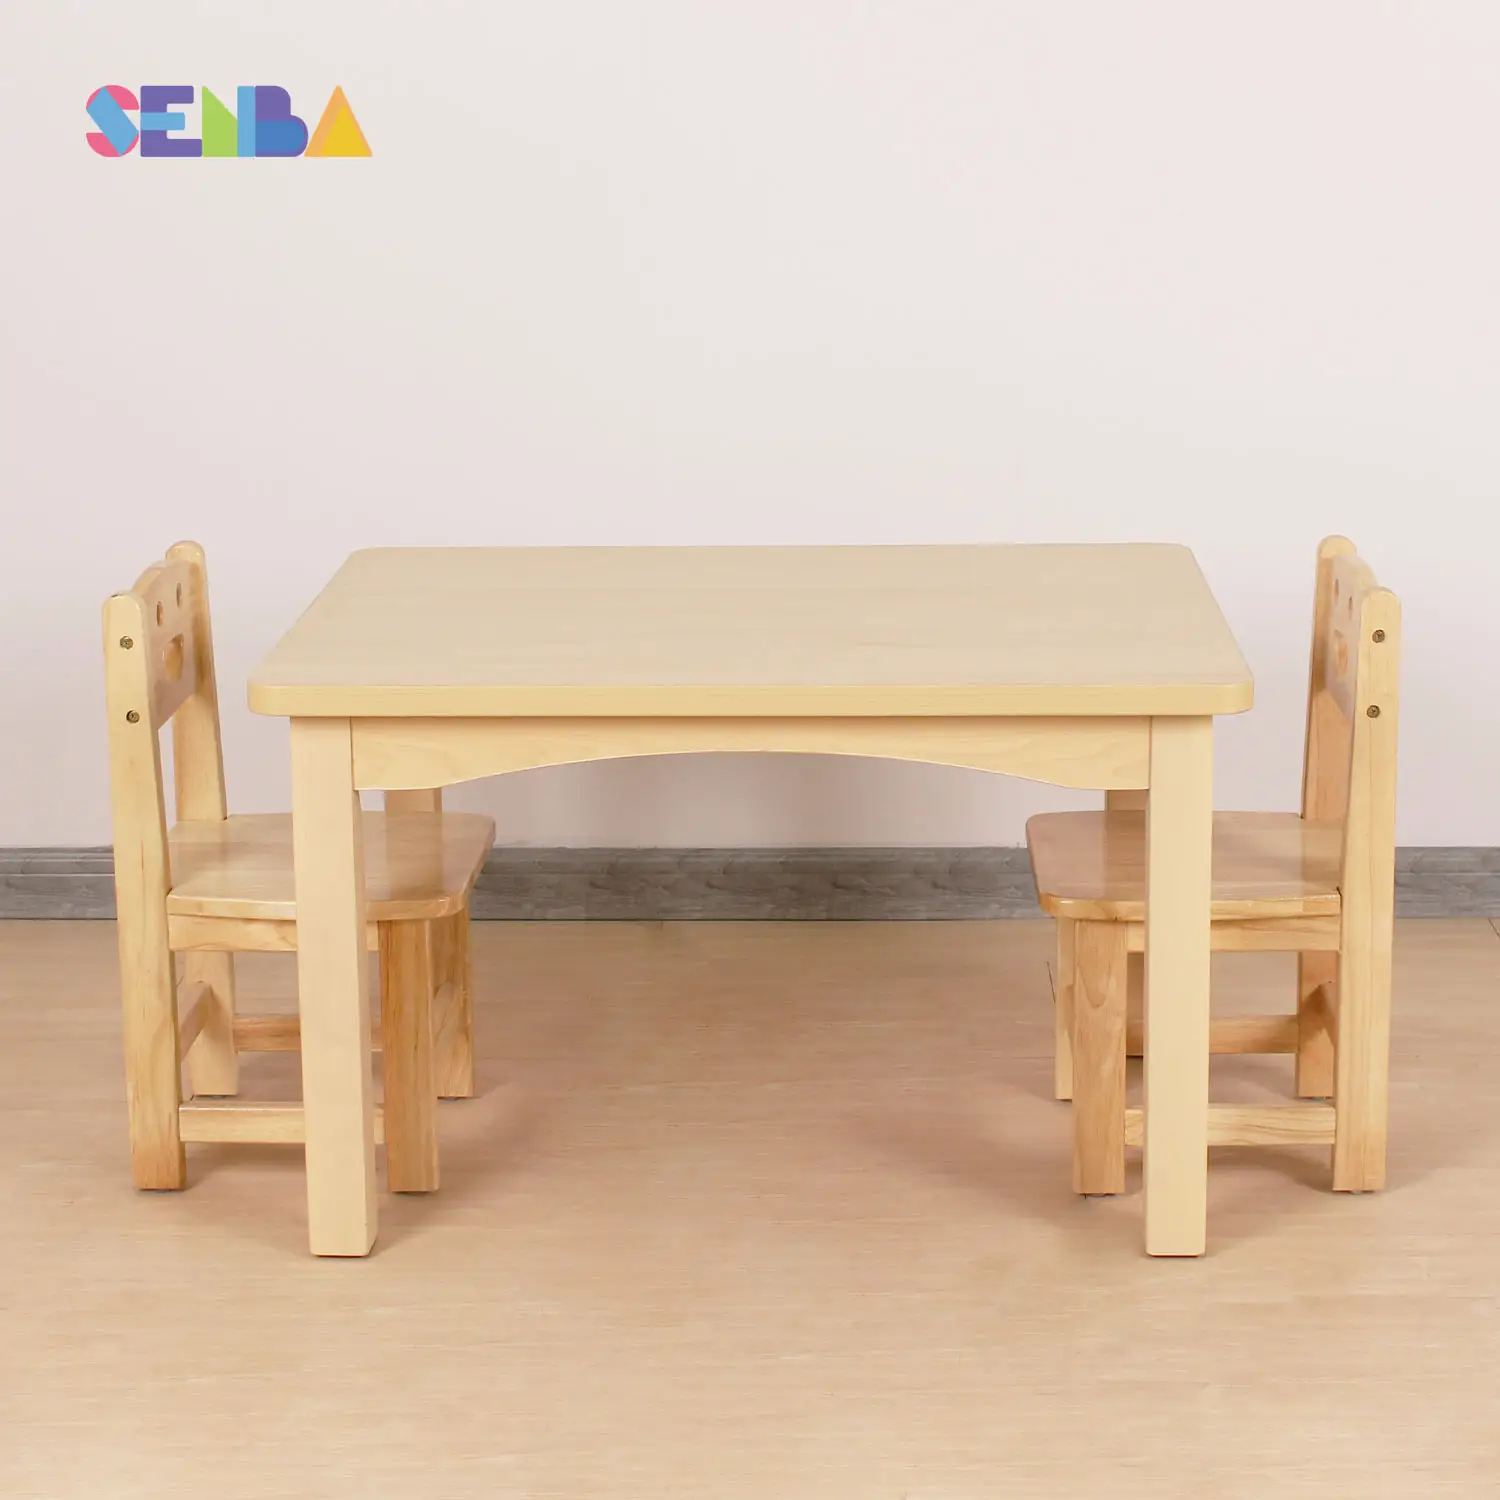 Hard Wearing Preschool Daycare Ergonomic Kids Chair And Children's Table For Events